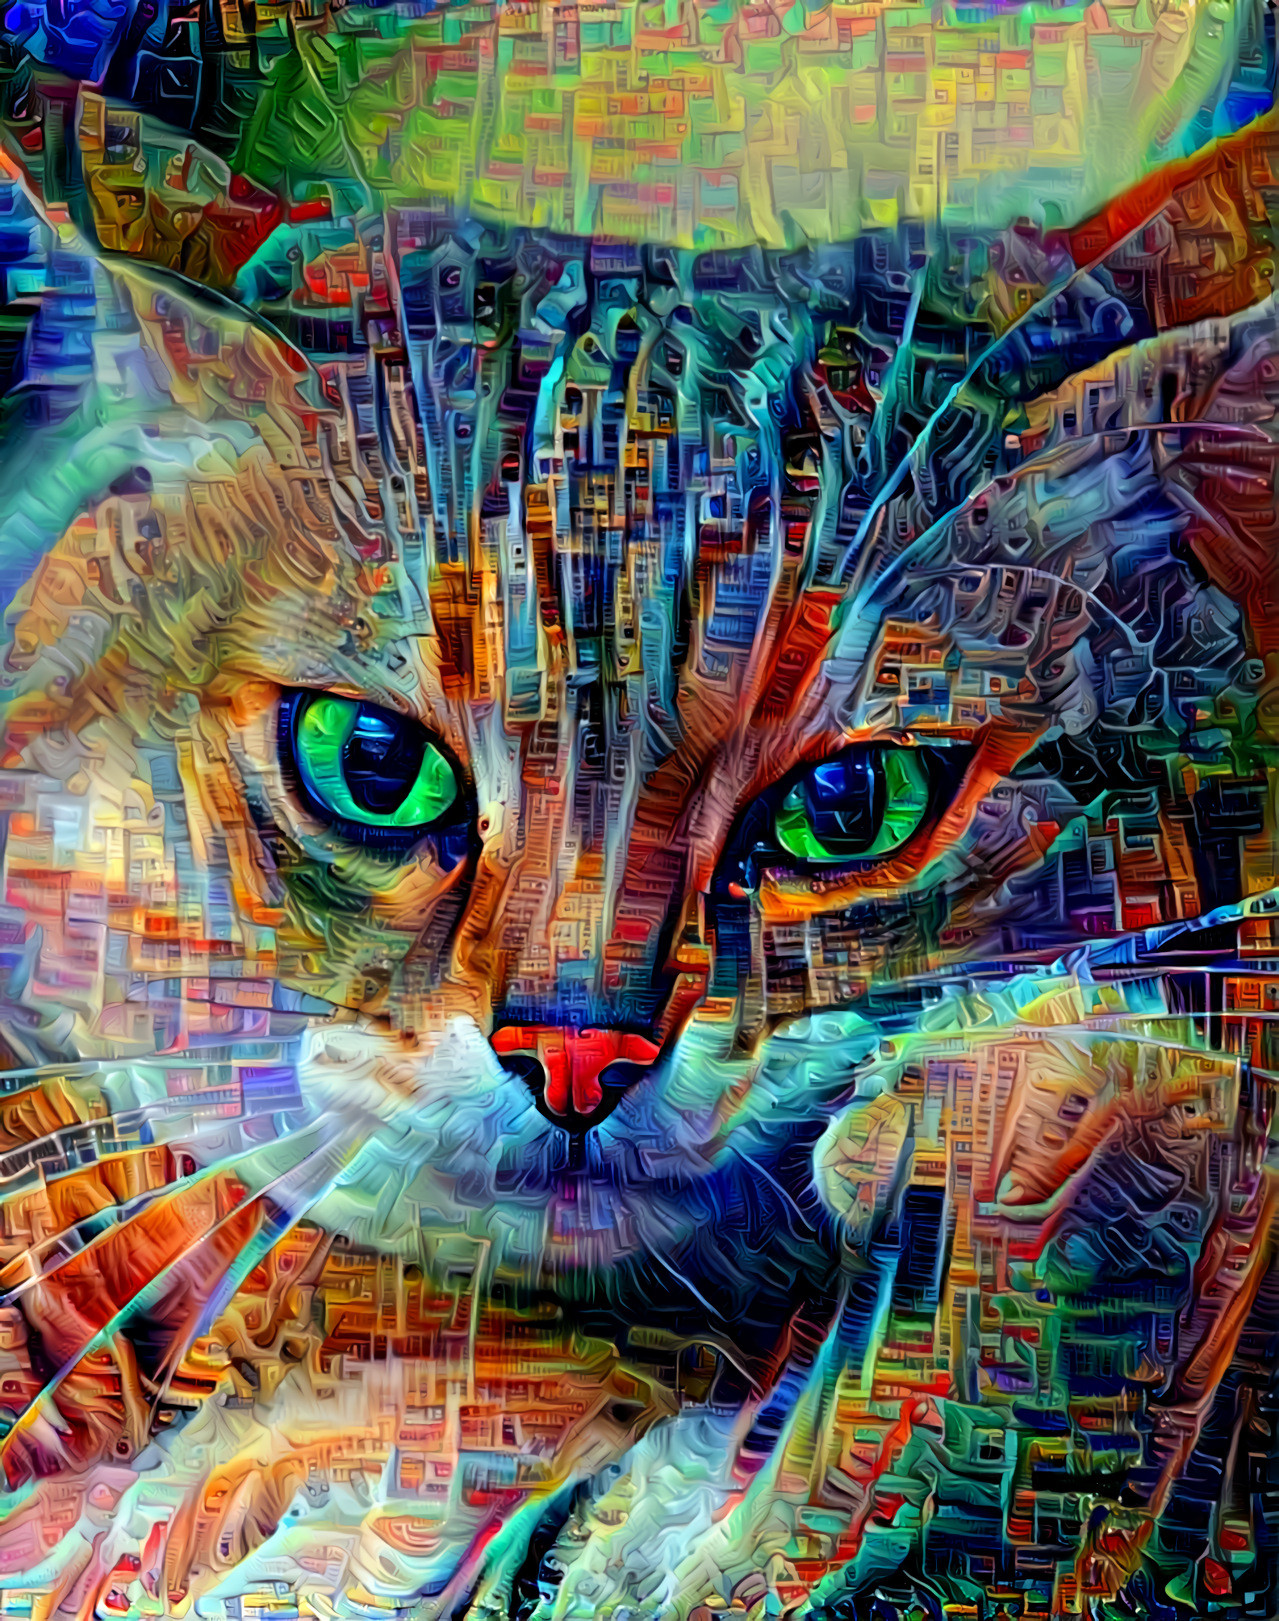 Image found online sometime in the past, unknown artist | Style cut from a section of my previous, most recent Deep Dream to this one.